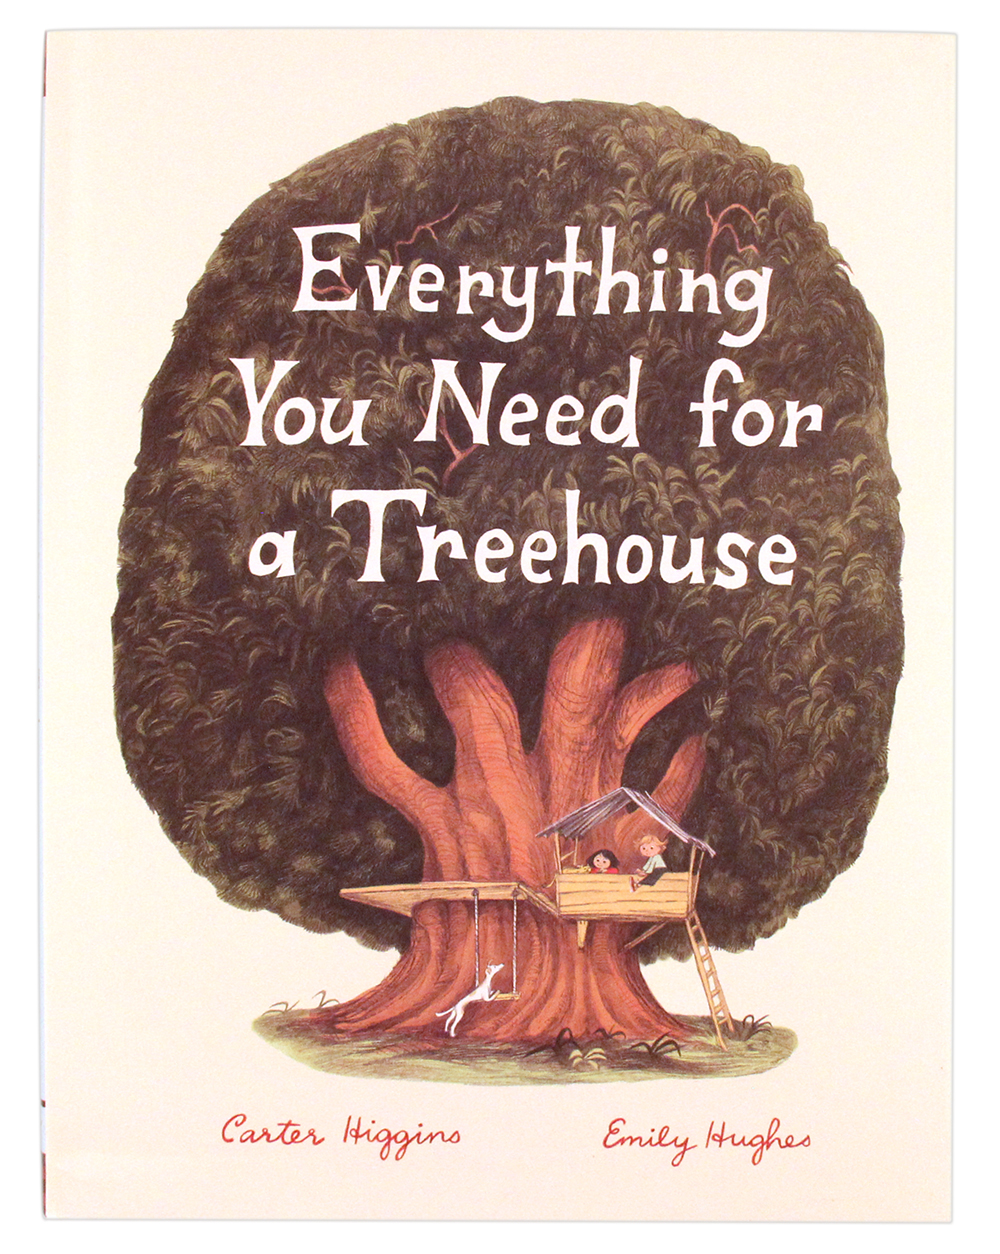 Everything You Need for a Treehouse, Emily Hughes